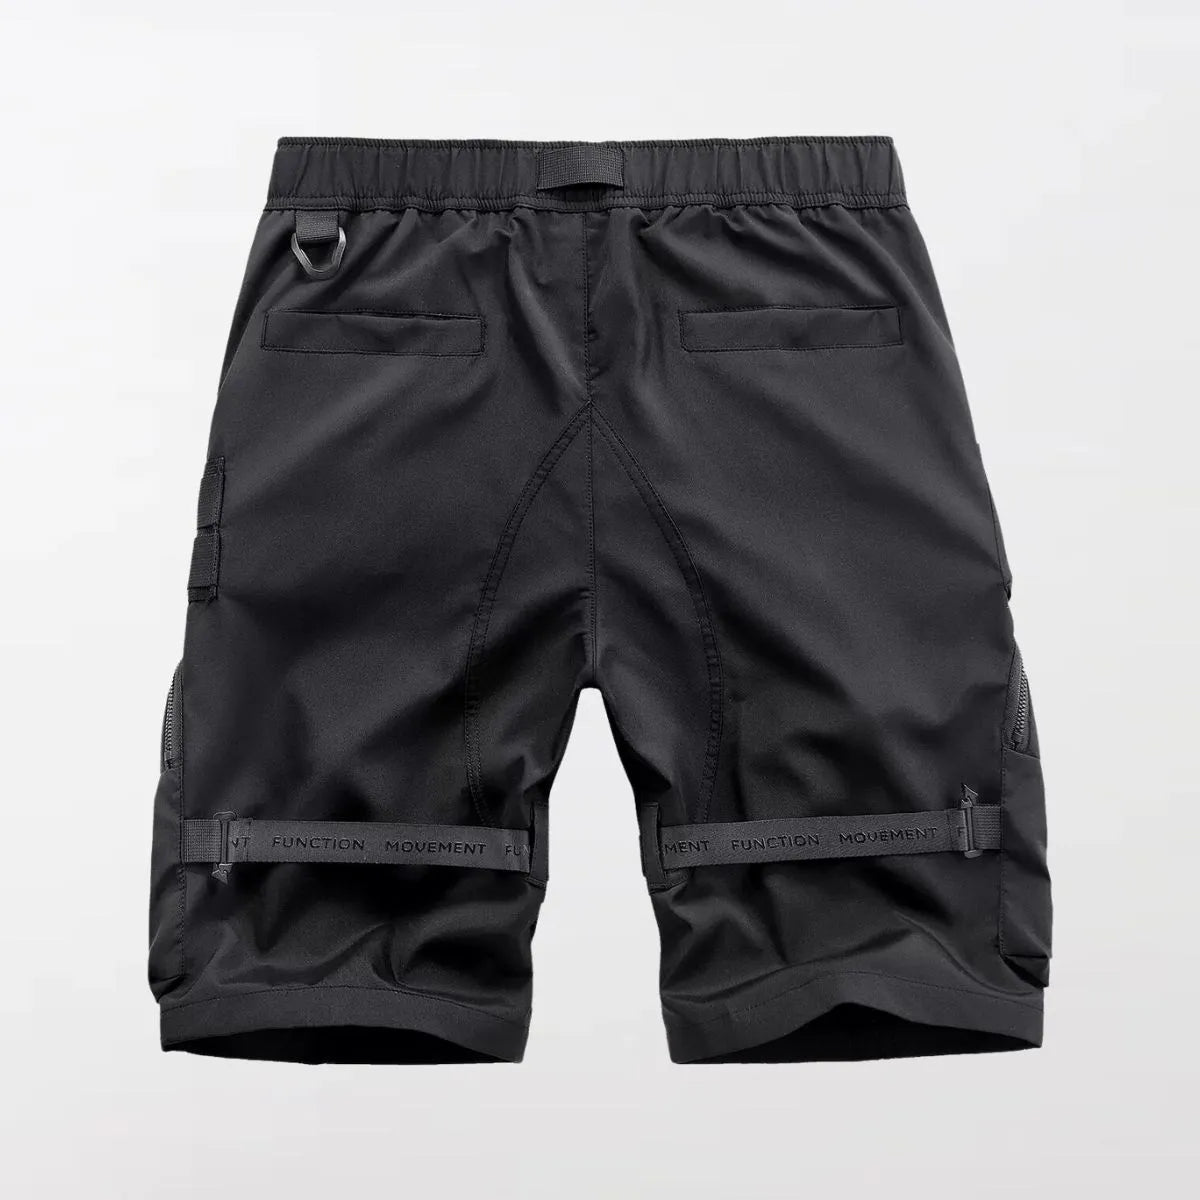 The Black S/23 Functional Multi Pocket Shorts By Clotechnow